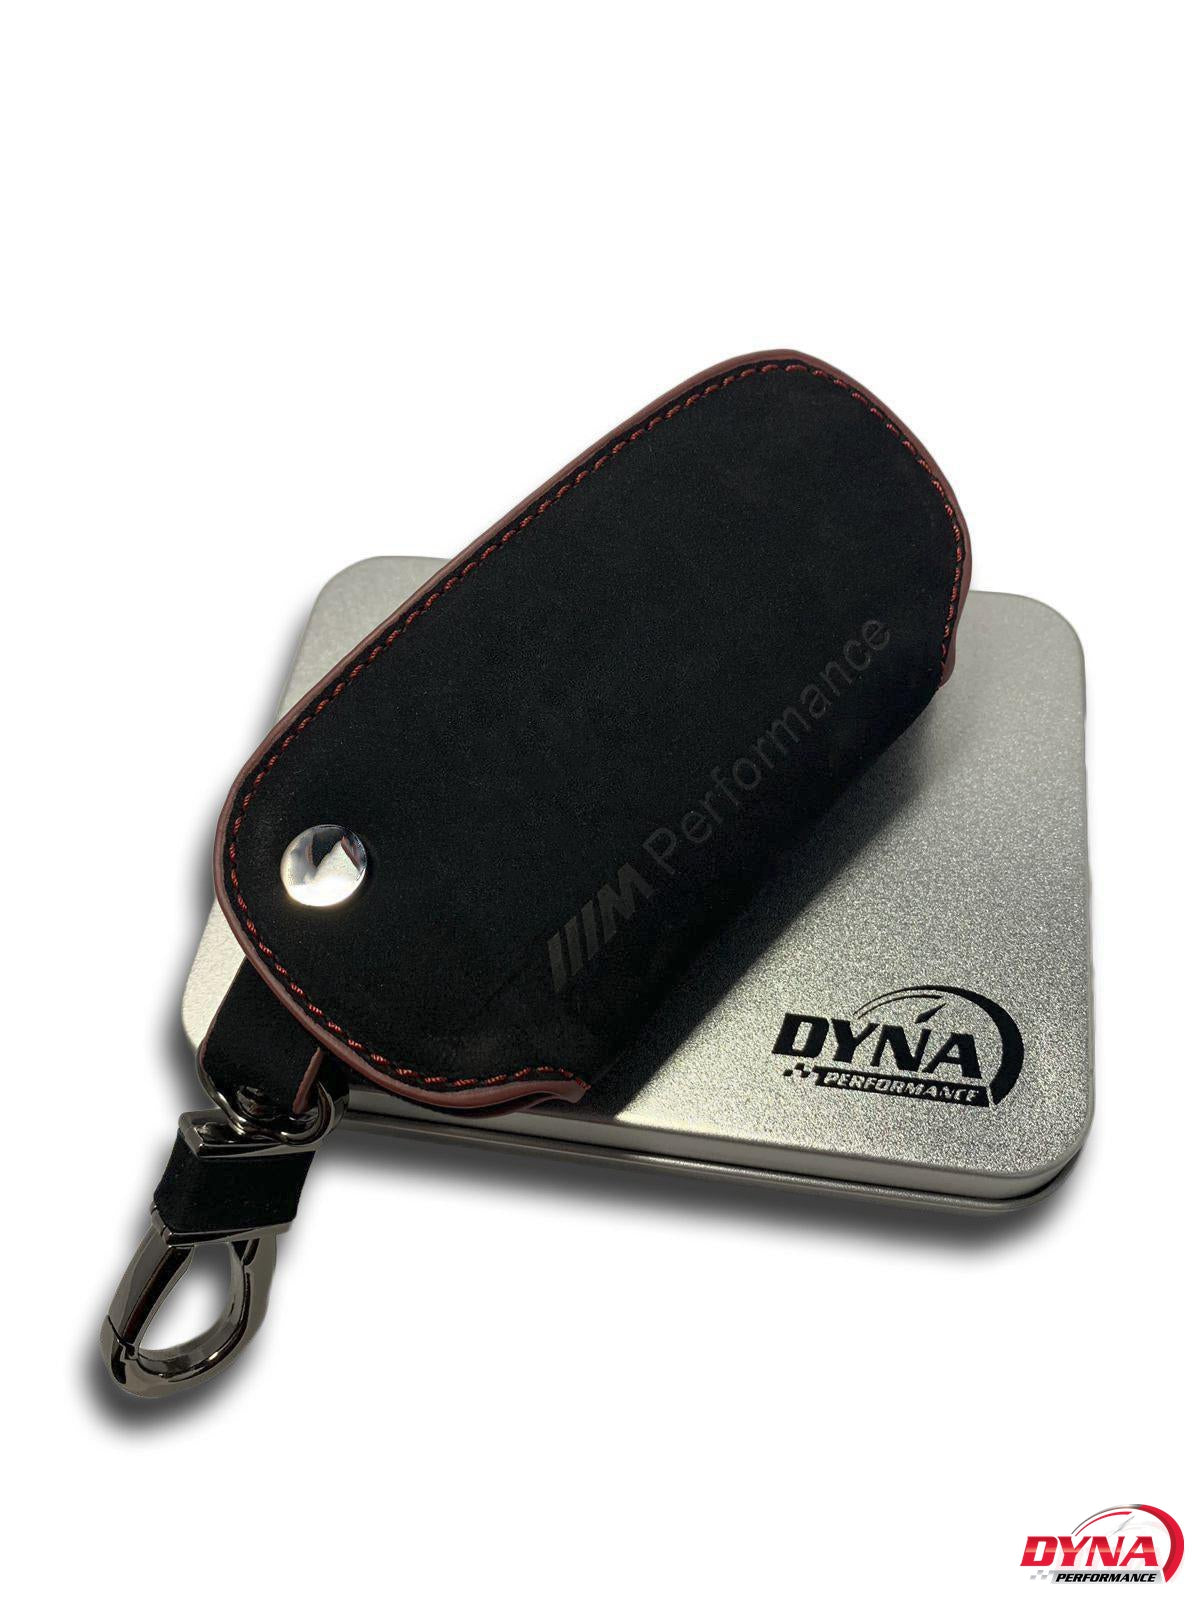 F Generation BMW M Performance Leather Key Fob Cover